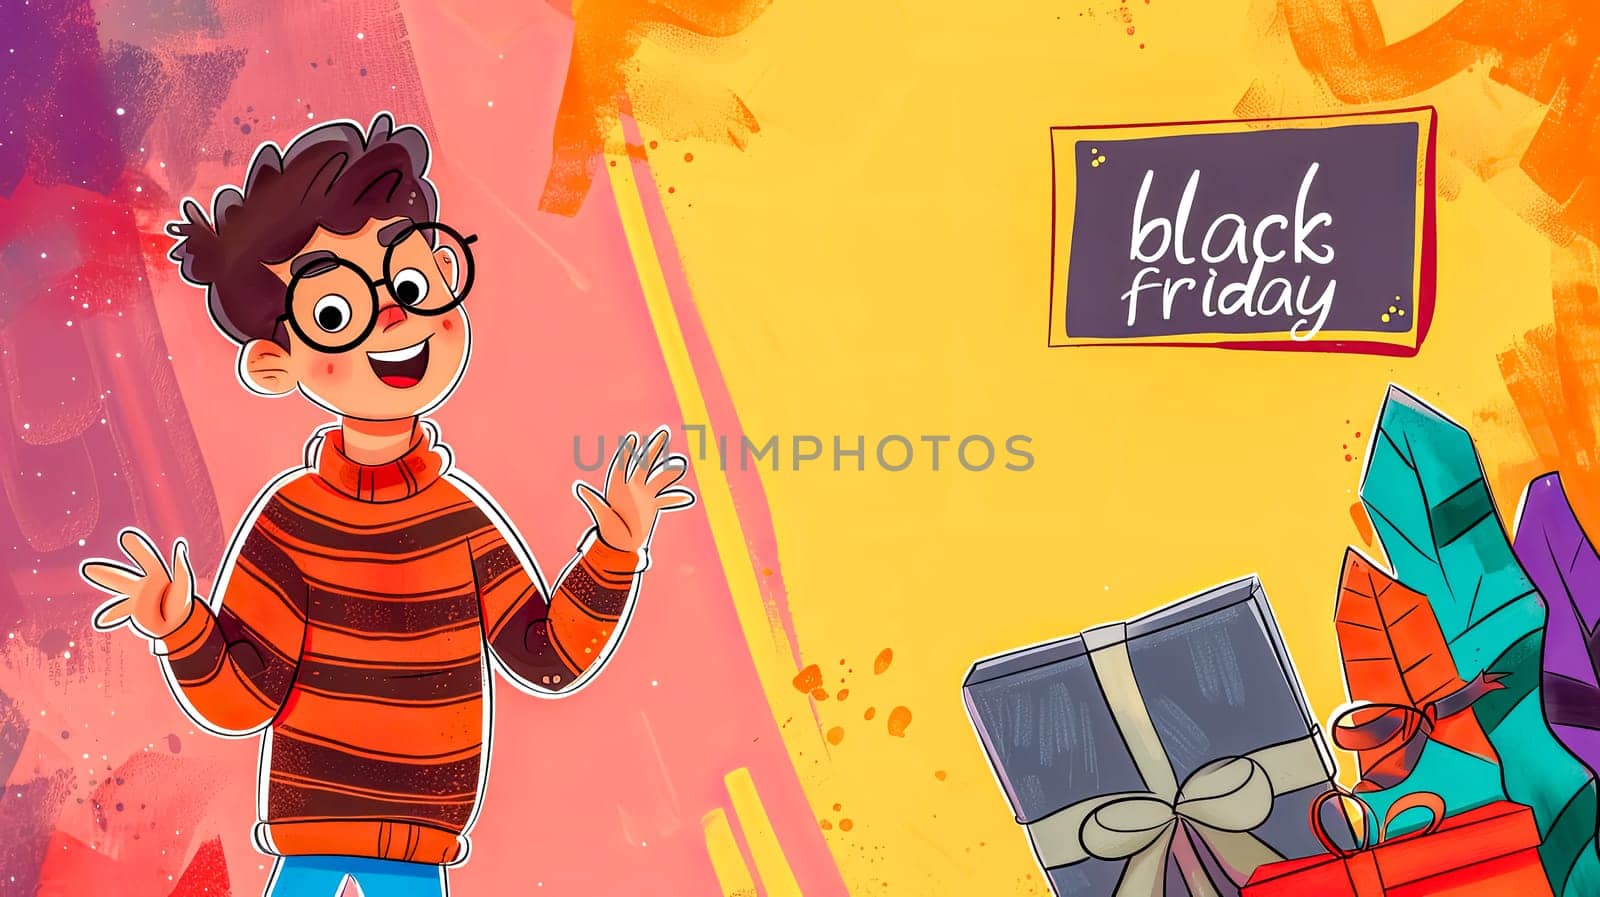 Excited shopper cartoon for black friday sales by Edophoto